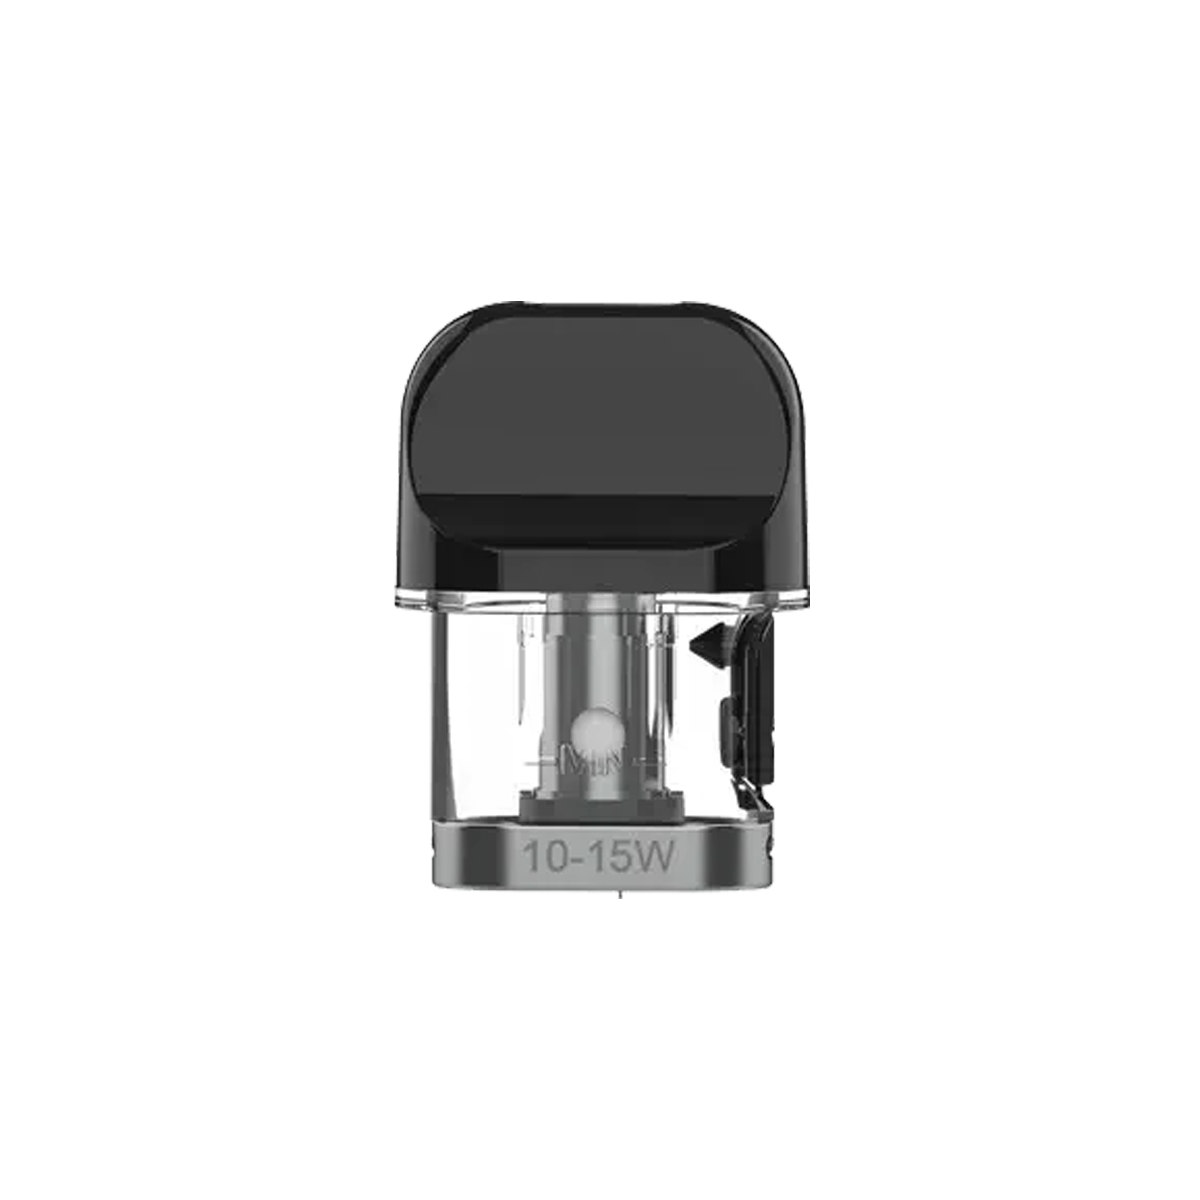 Smok Novo X Replacement Pod Cartridge Meshed Coil - 0.8 Ω  